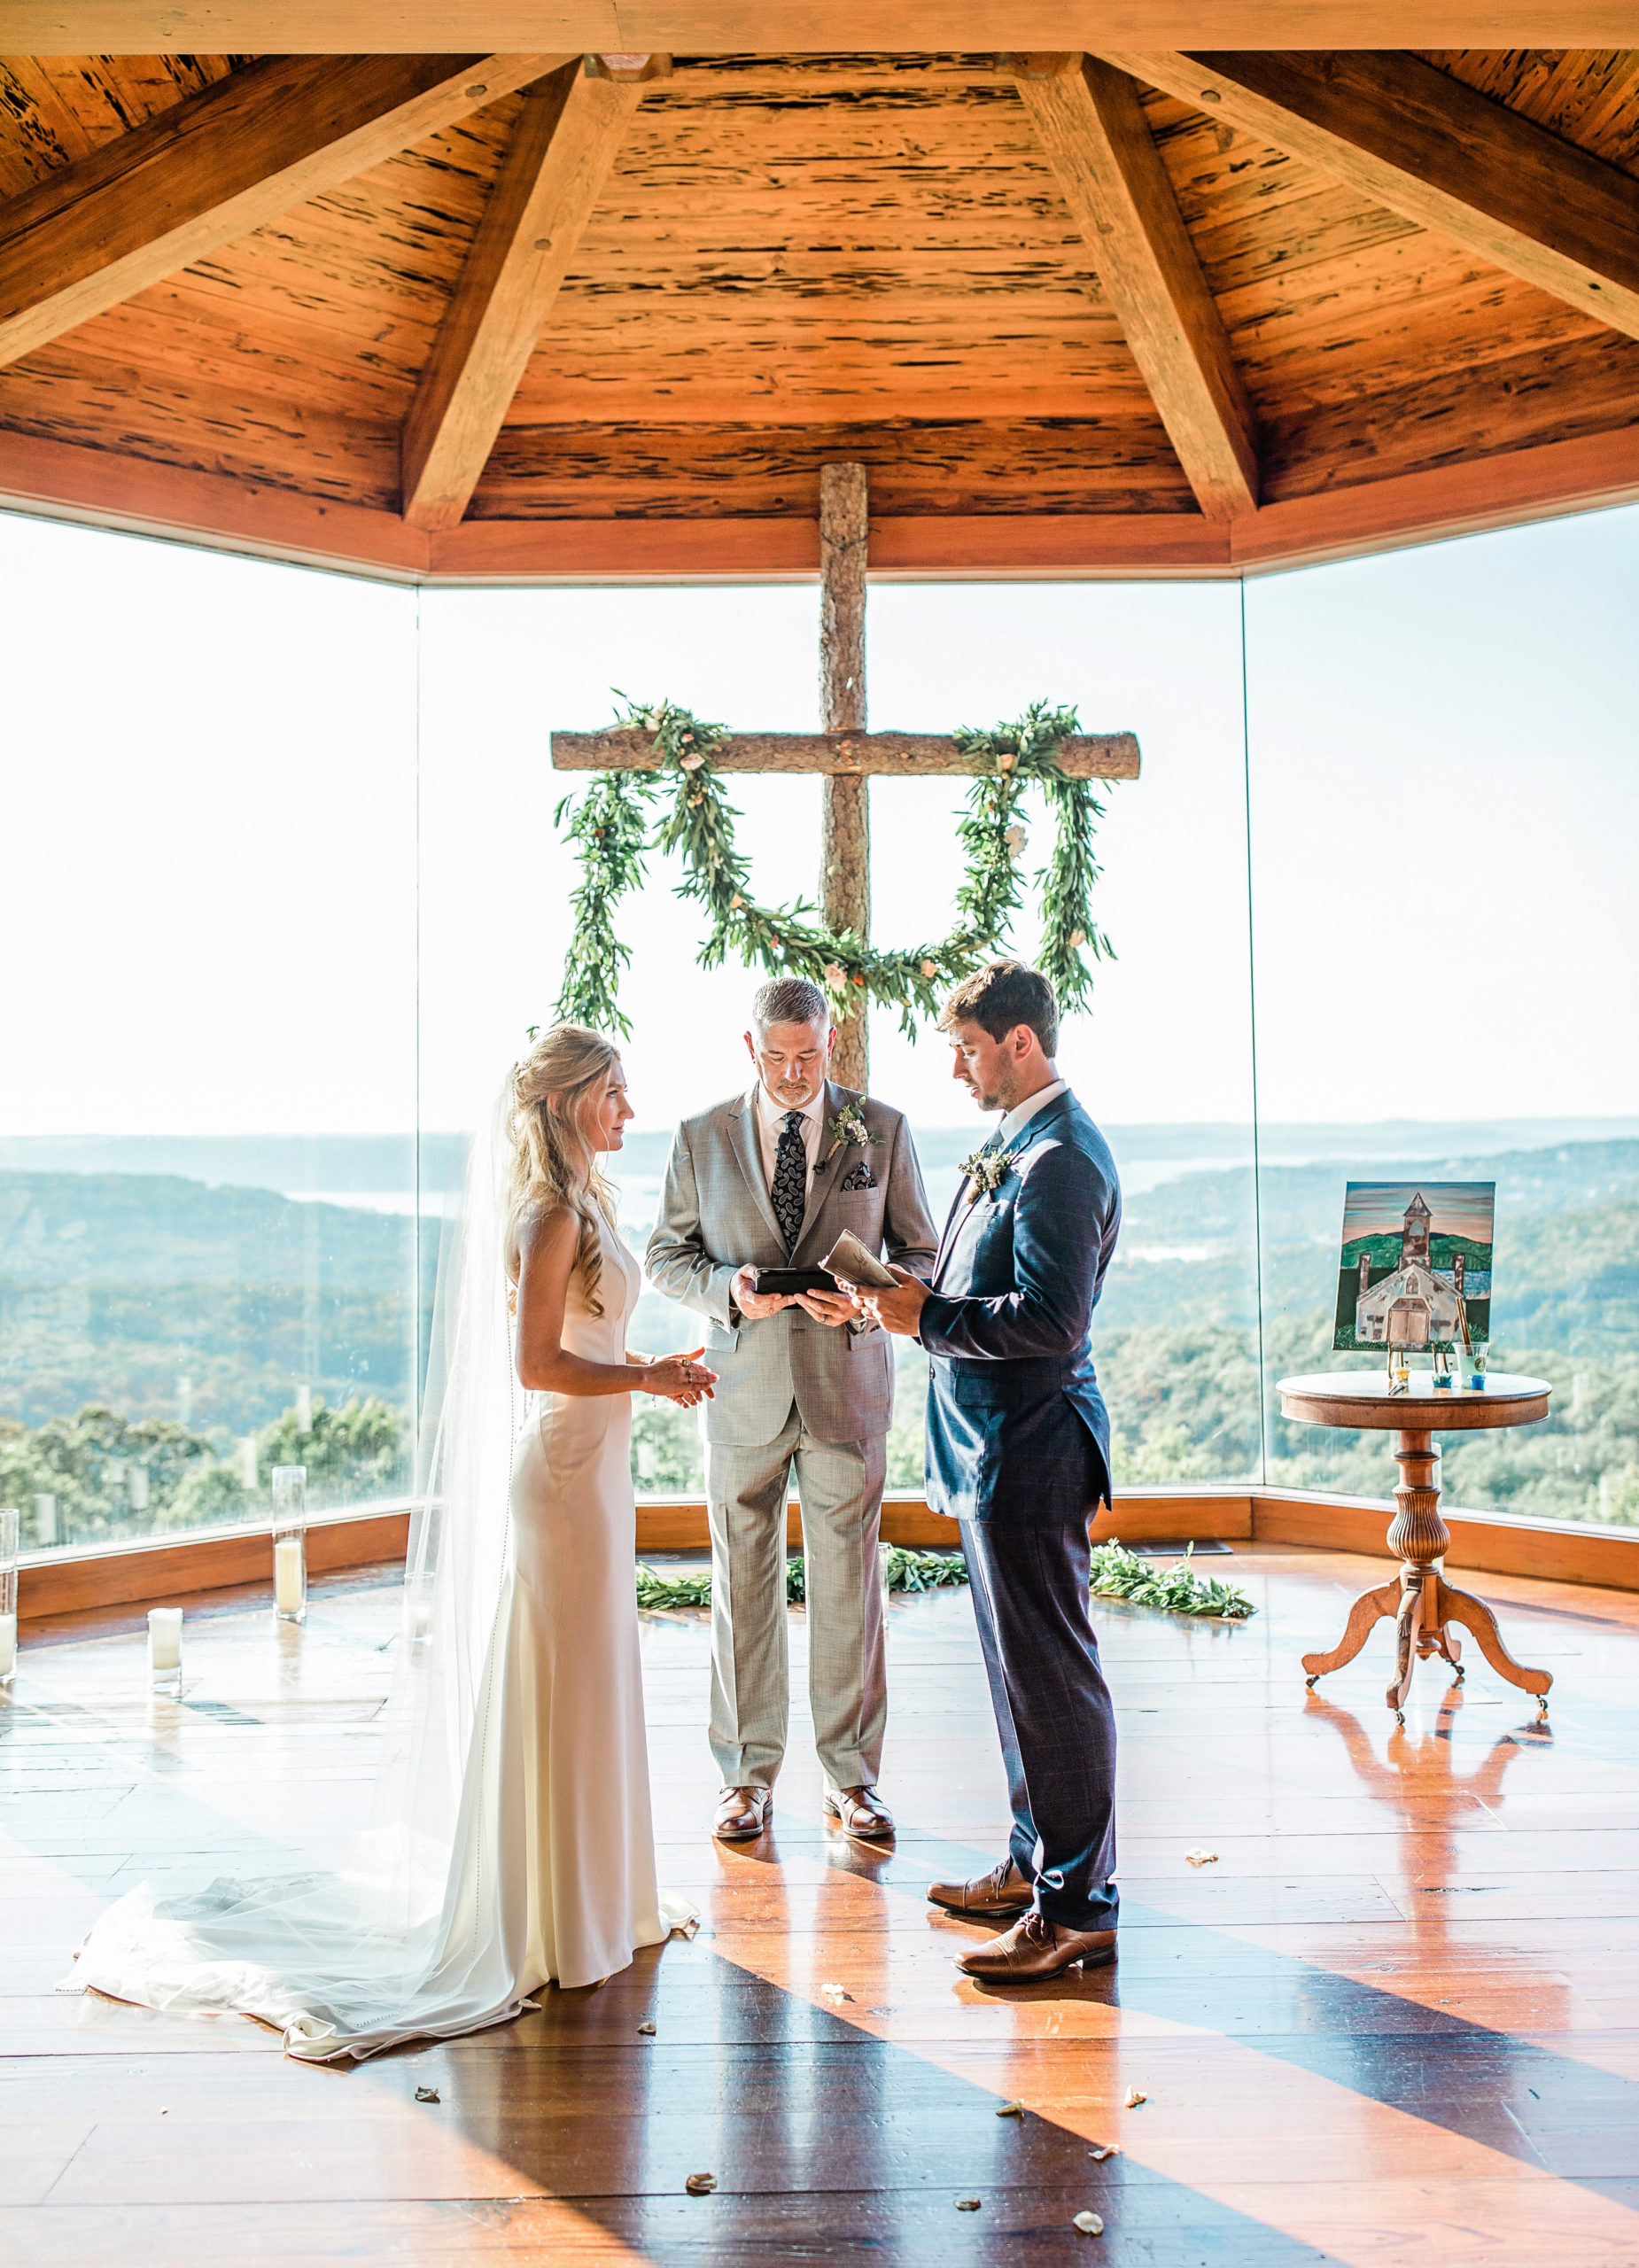 Bride and groom reading their vows during the ceremony at Chapel of the Ozarks, Branson Missouri by Tatyana Zadorin Photography